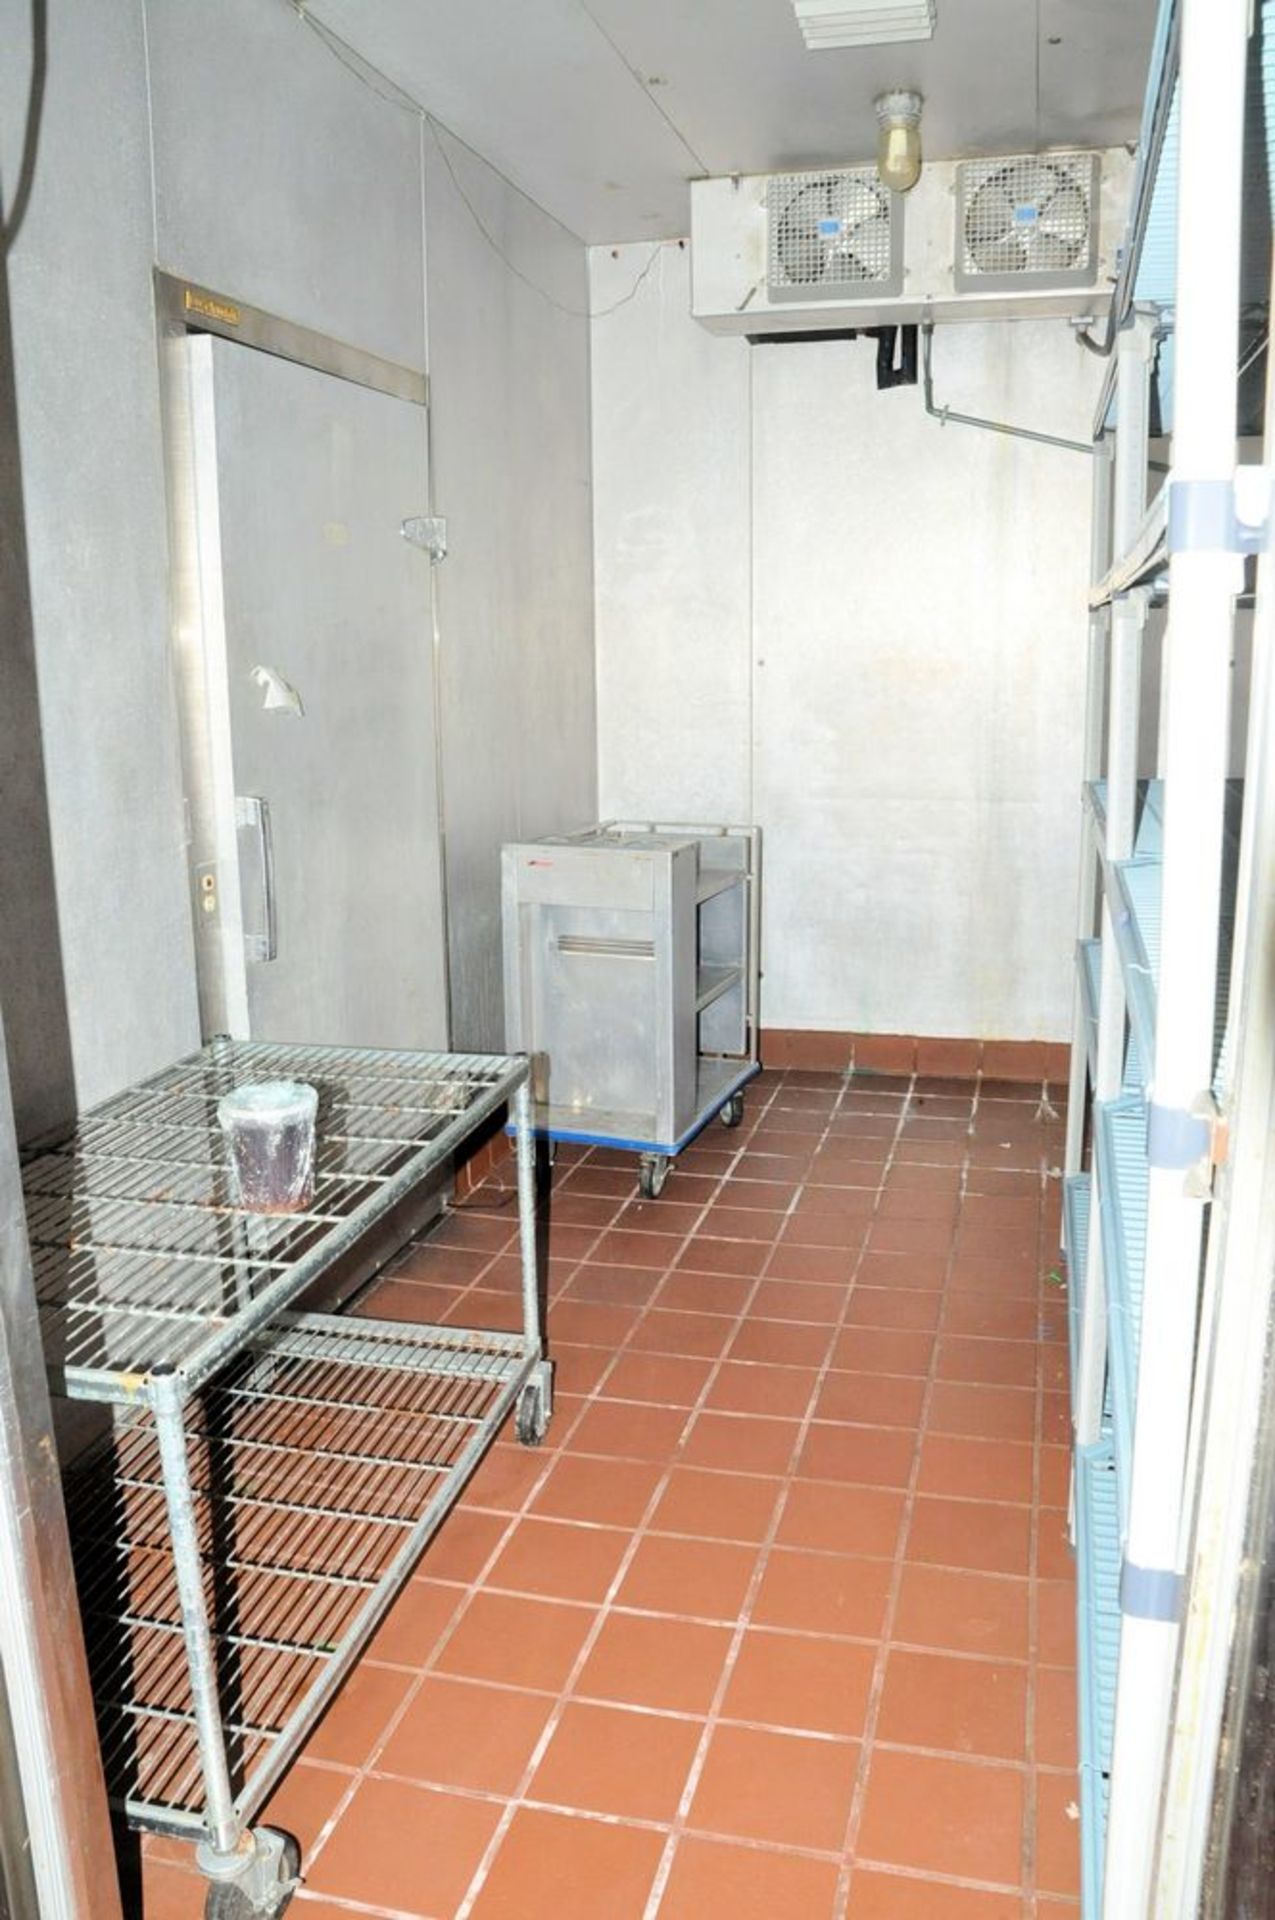 15' x 13' 2-Room Walk-In Refrigerator/Freezer, (Exterior Compressors Not Included), (Main Kitchen - Image 2 of 9